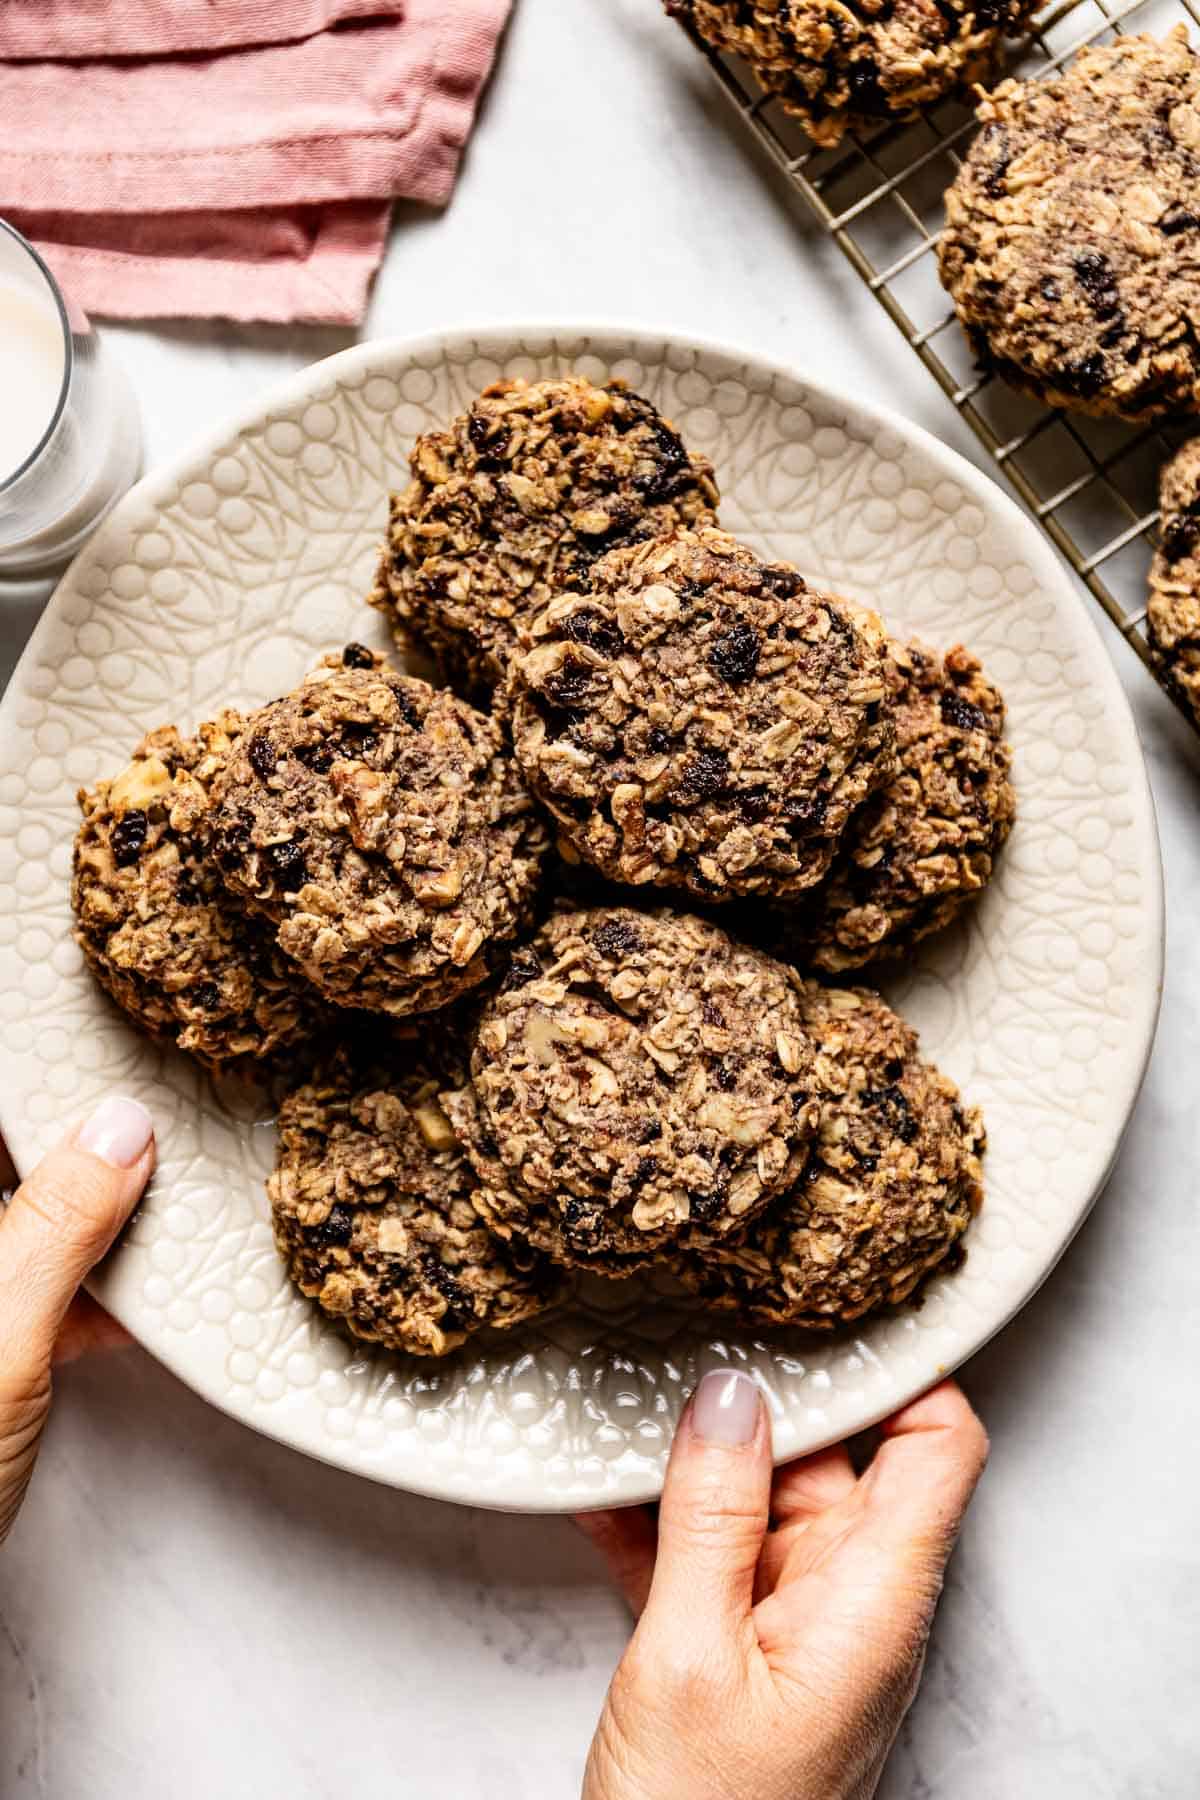 Healthy oatmeal raisin cookies placed on a plate being served by a person.